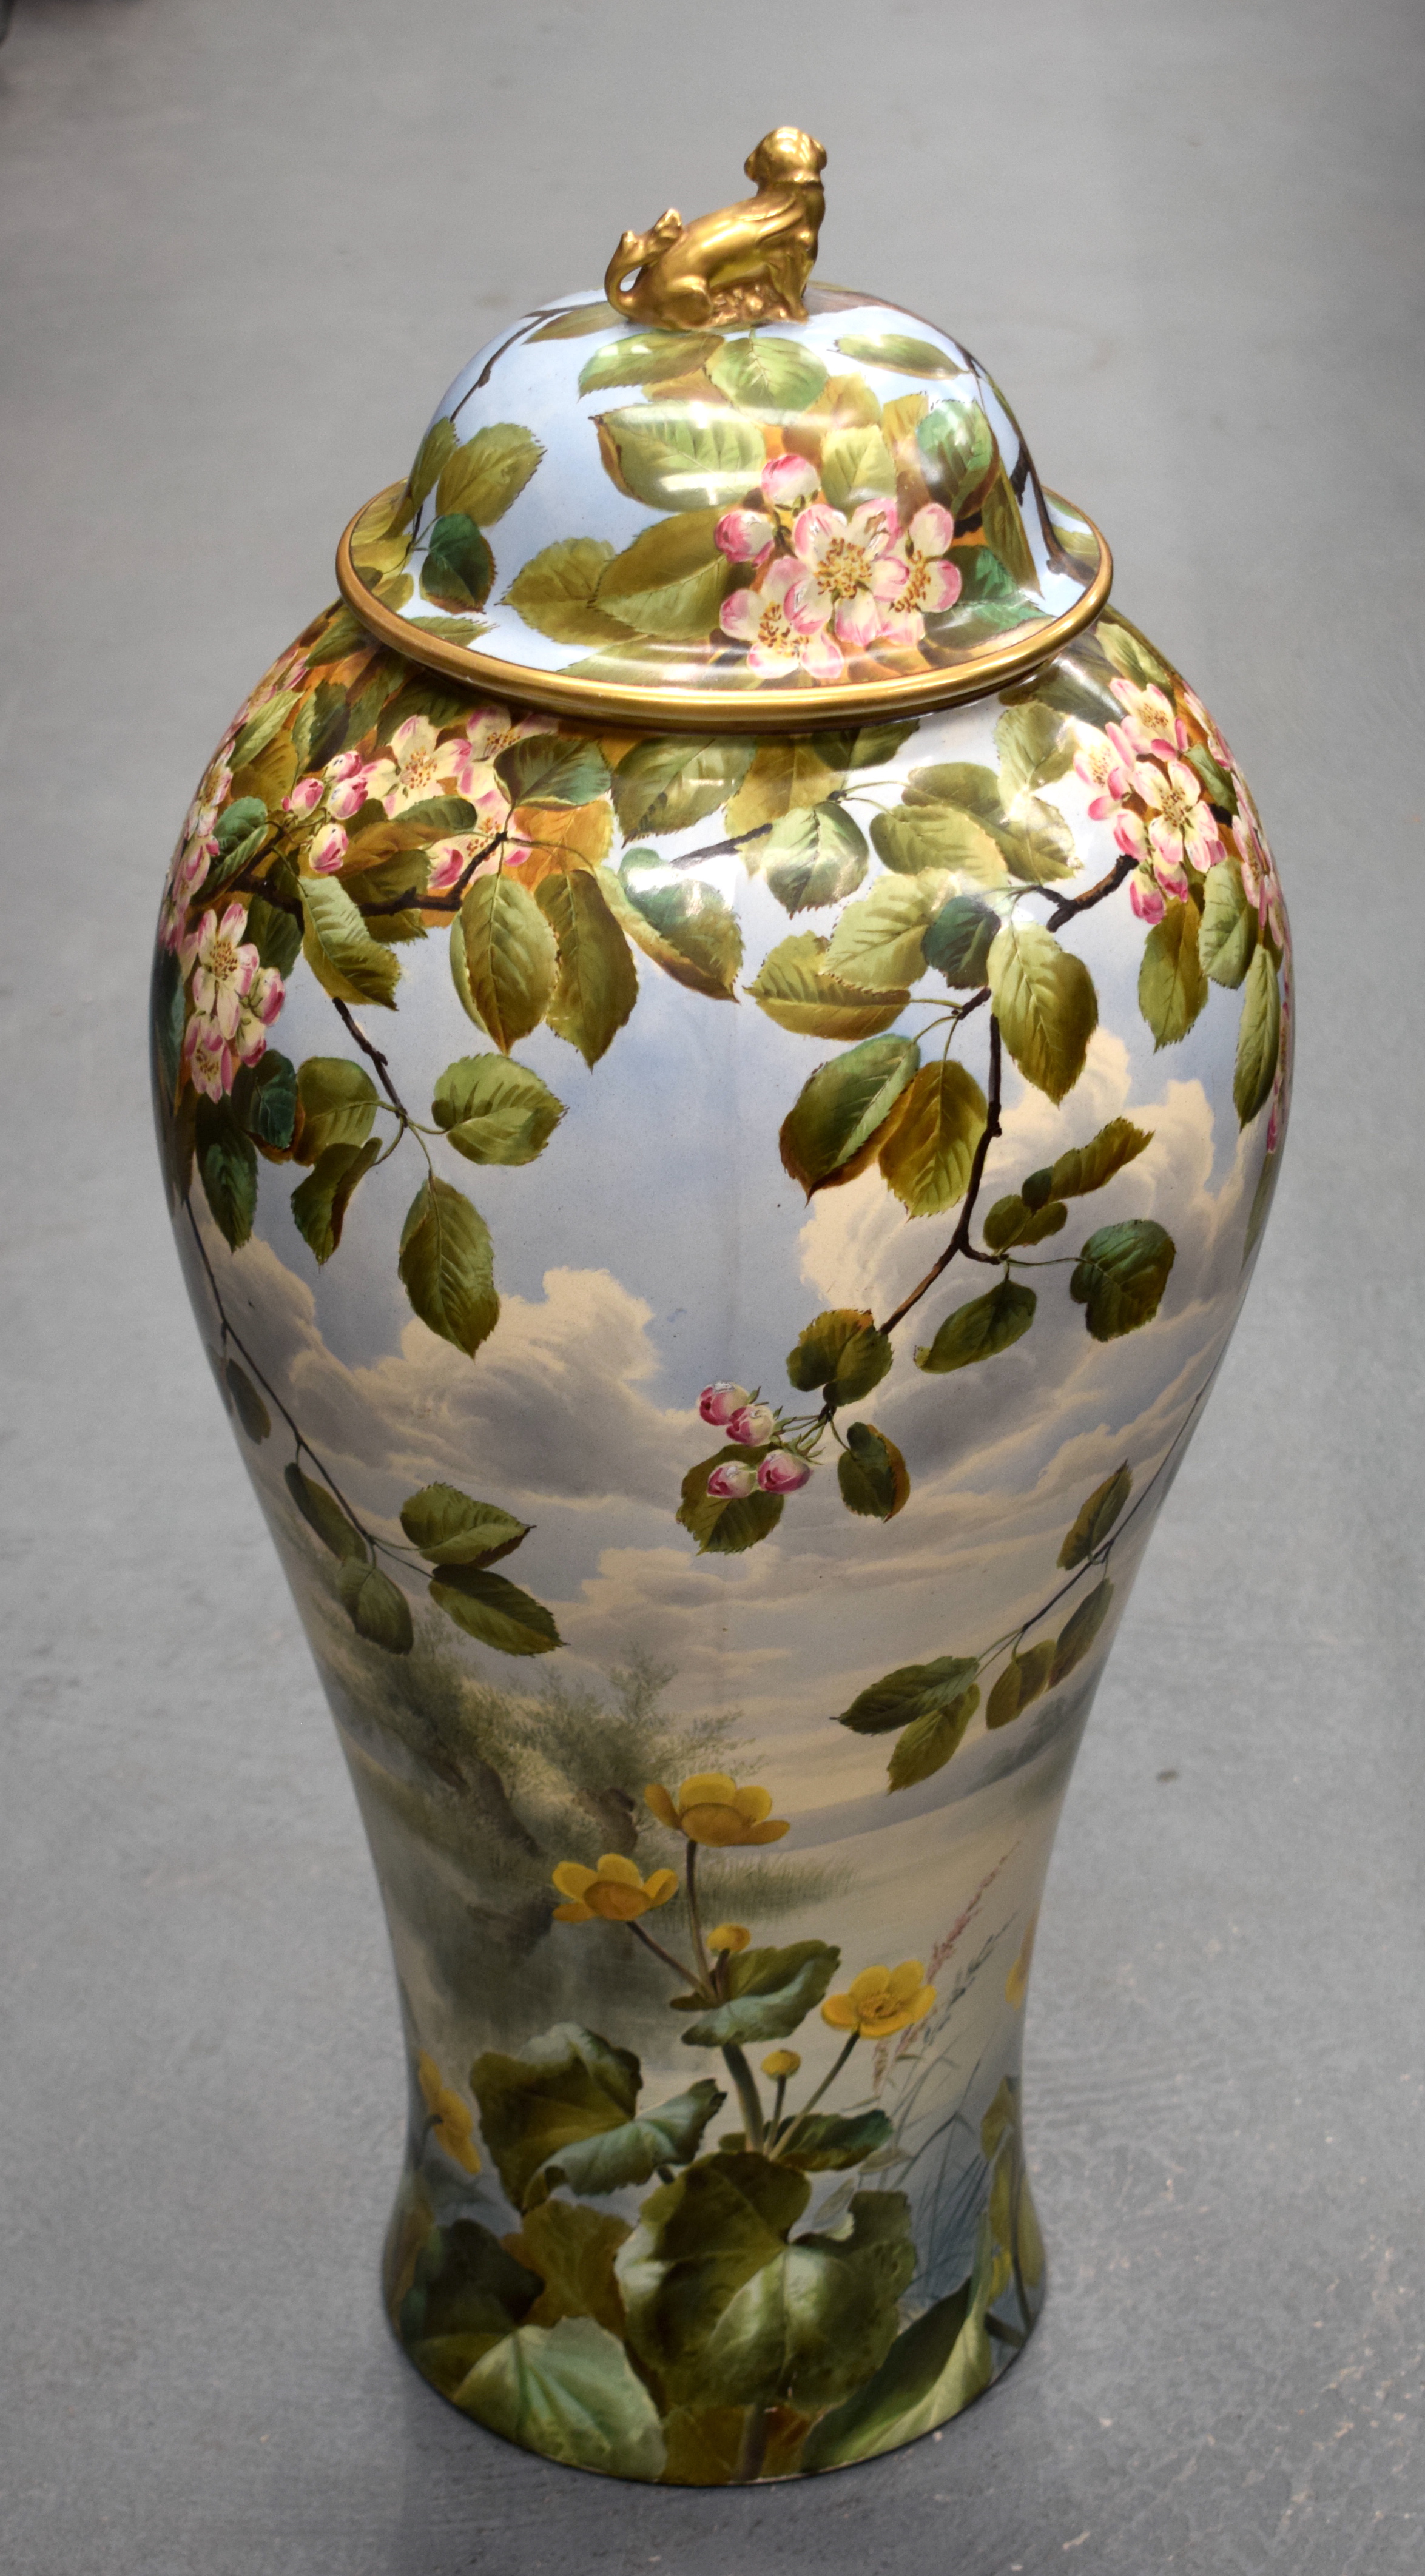 A LARGE 19TH CENTURY CONTINENTAL POTTERY FLOOR STANDING VASE AND COVER probably Minton or Burmantoft - Image 2 of 5